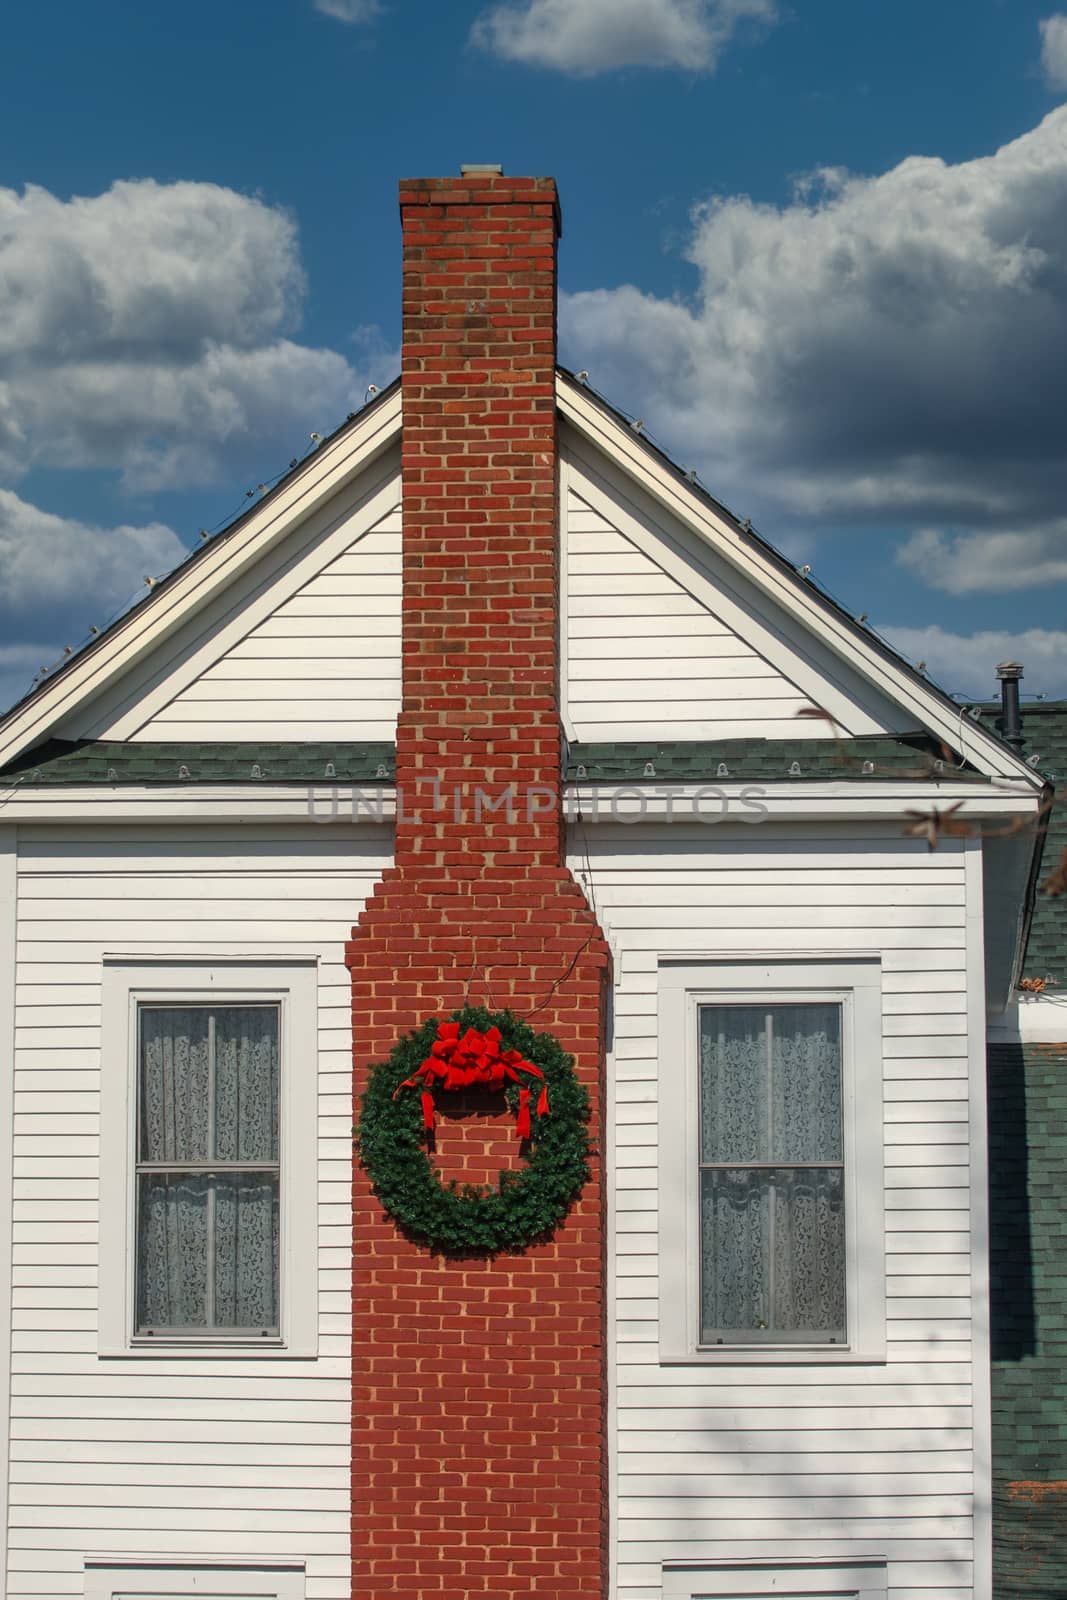 Chirstmas Wreath with Red bow on a brick chimney of old white siding traditional farmhouse